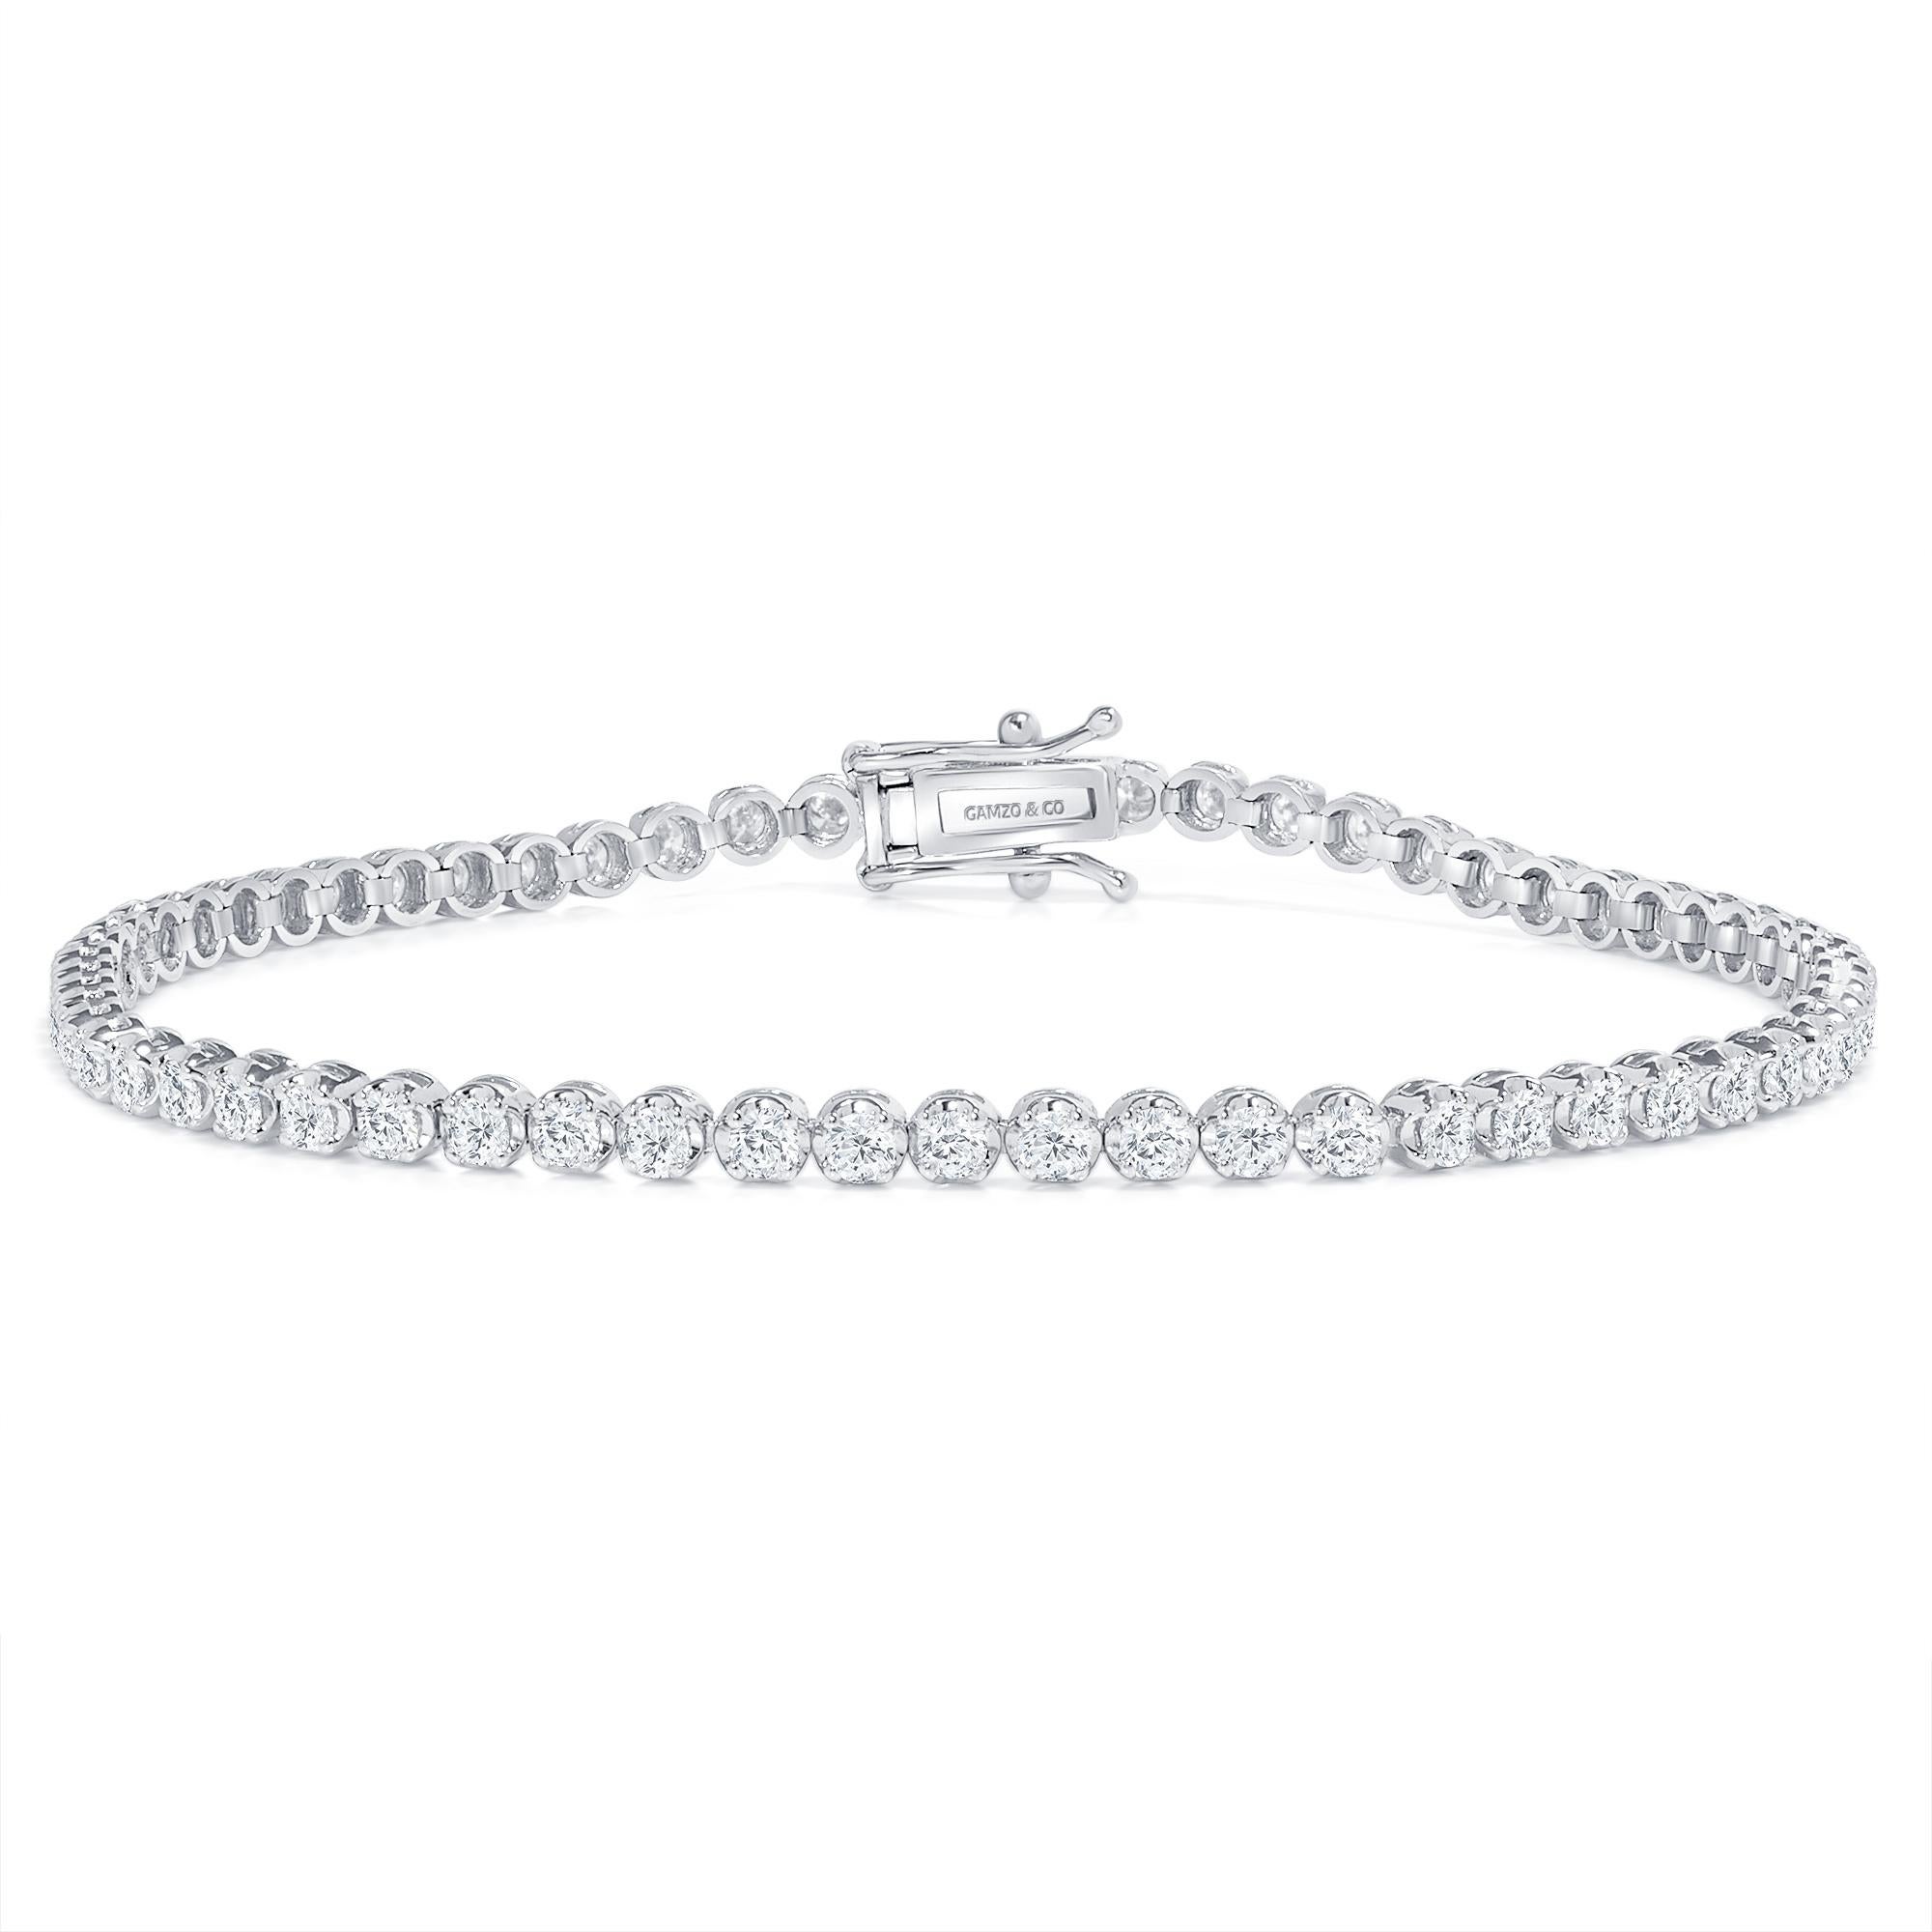 These beautiful round diamonds dance around your wrist as they absorb light and attention.
Metal: 14k Gold
Diamond Cut: Round
Diamond Total Carats: 3ct
Diamond Clarity: VS
Diamond Color: F
Color: White Gold
Bracelet Length: 8.5 Inches 
Included with